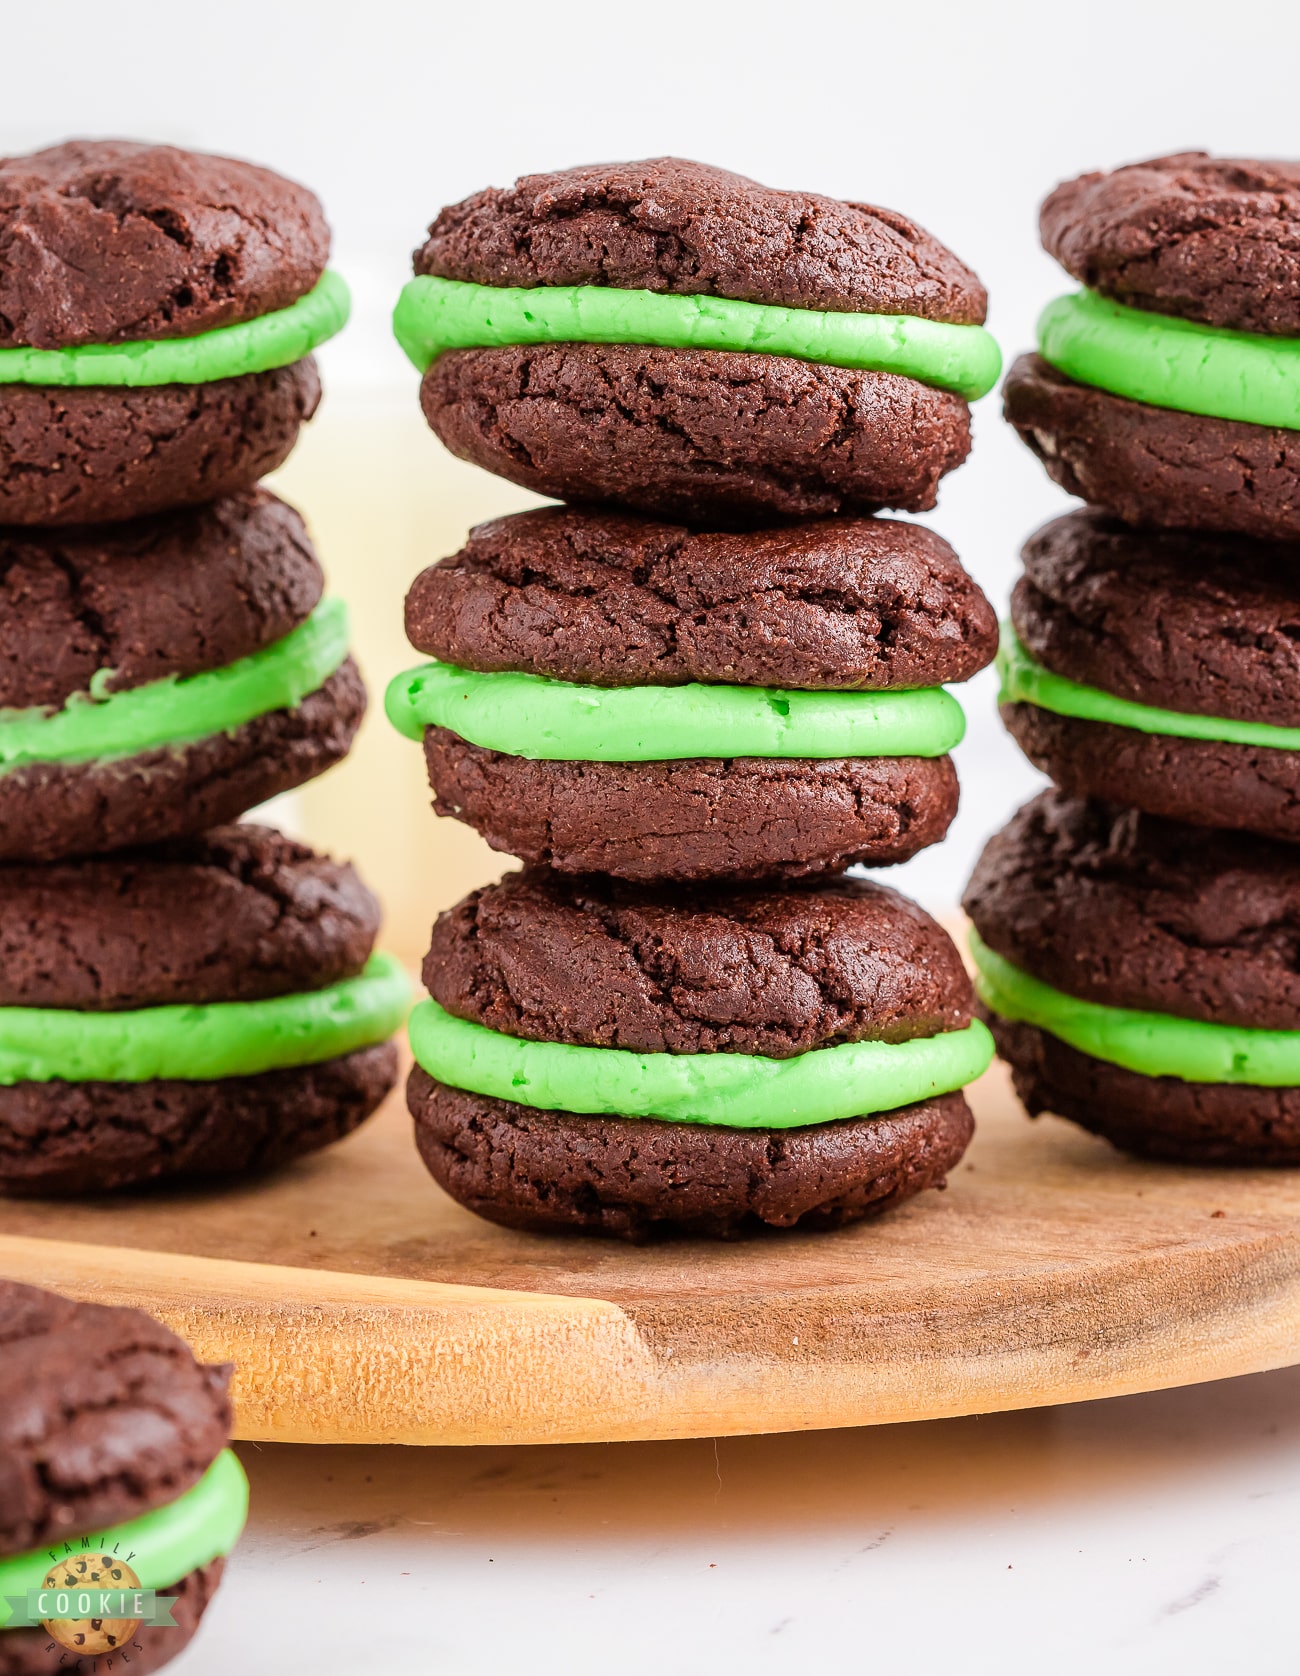 stacks of mint oreo cookies made with cake mix